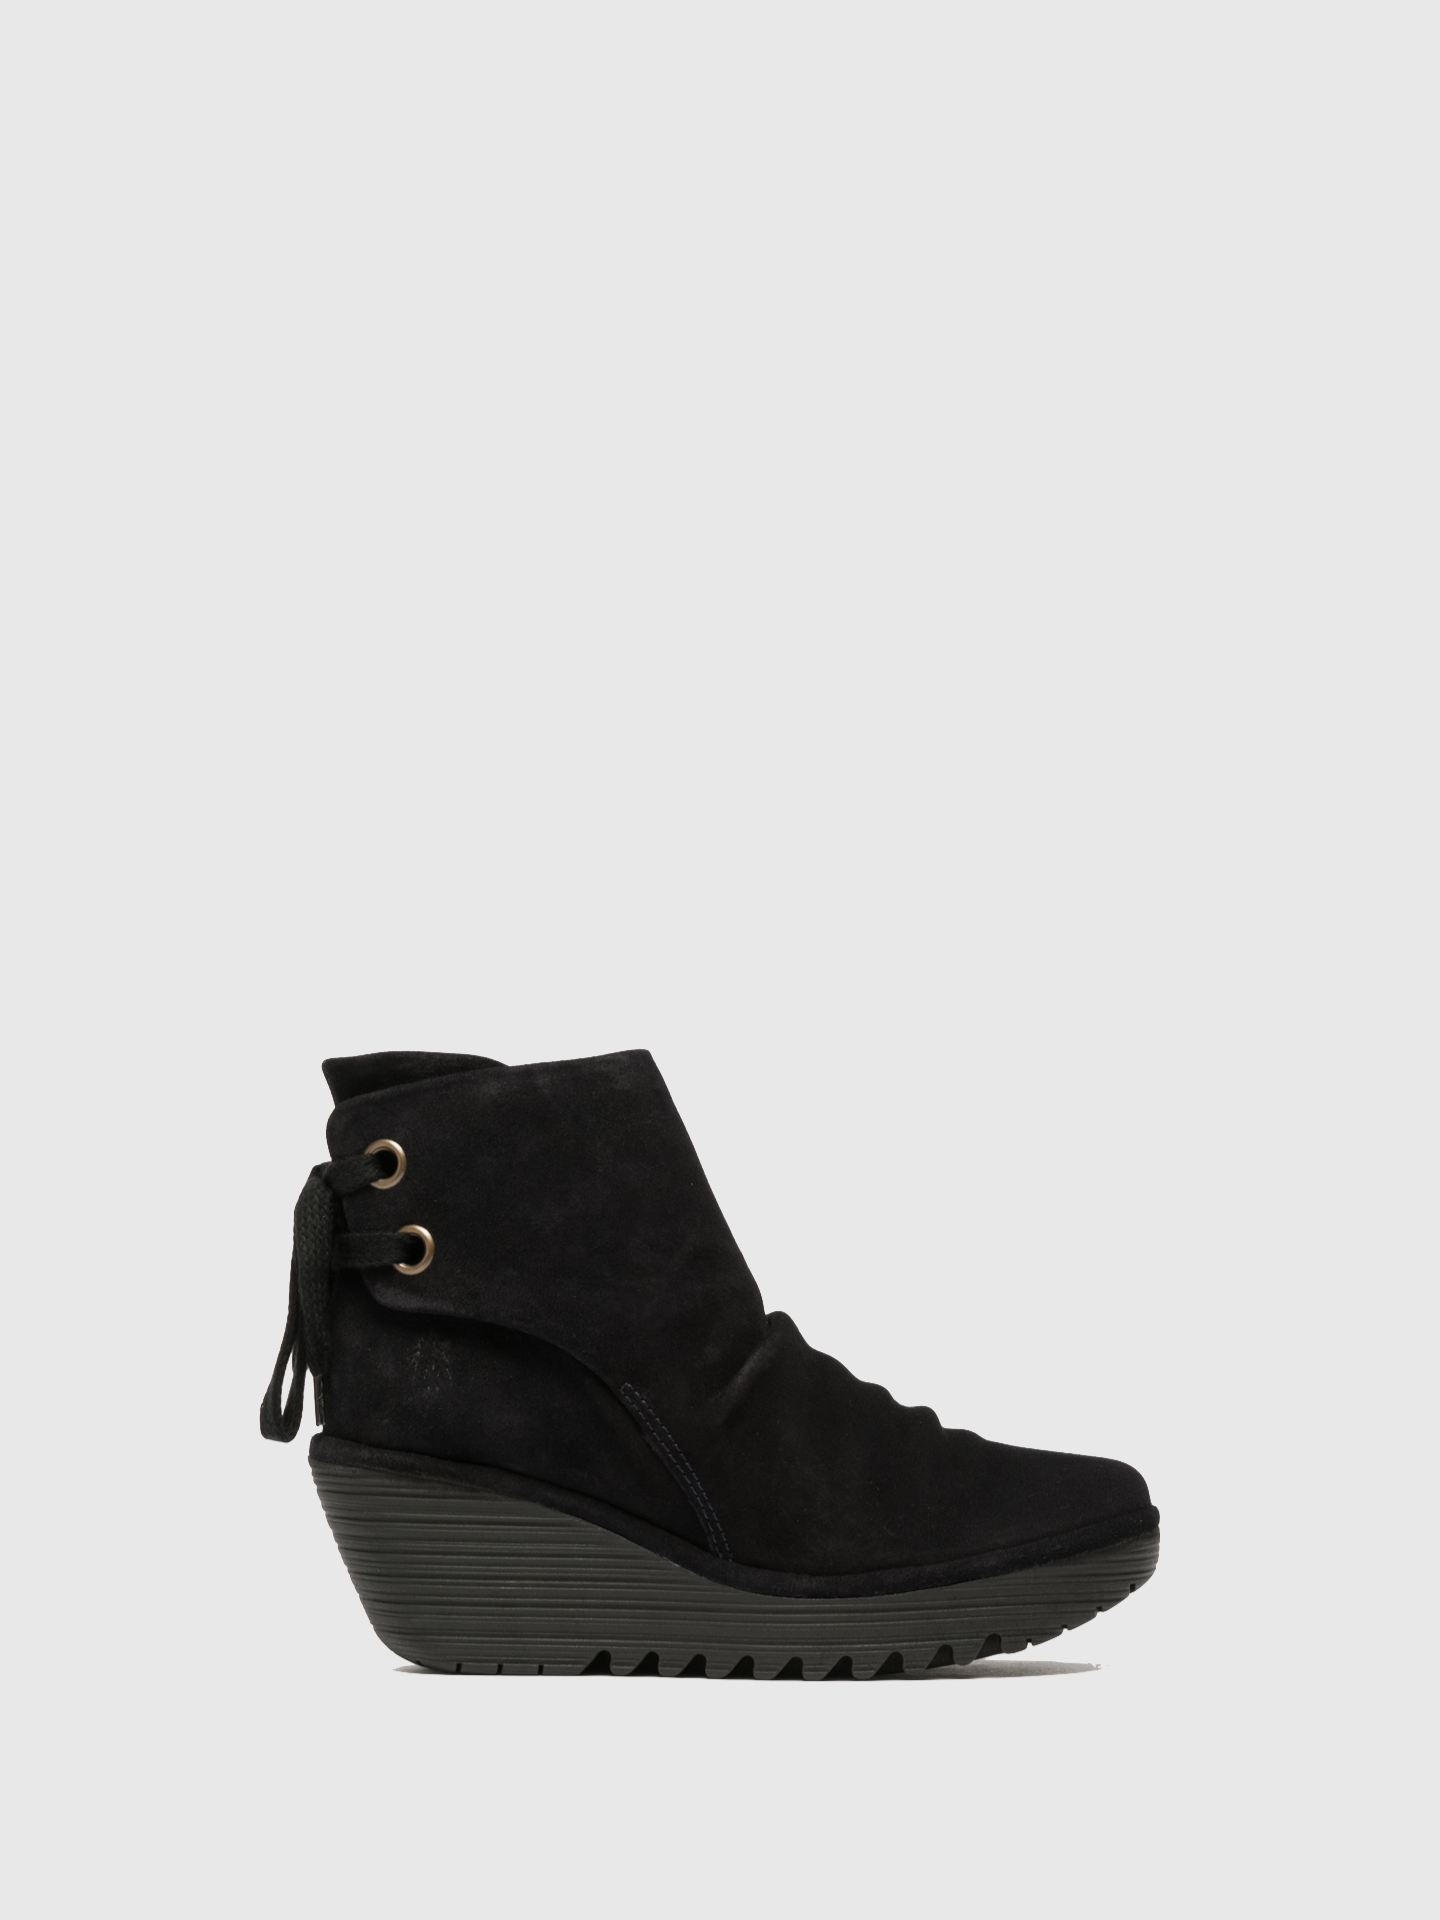 Fly London Carbon Black Wedge Ankle Boots